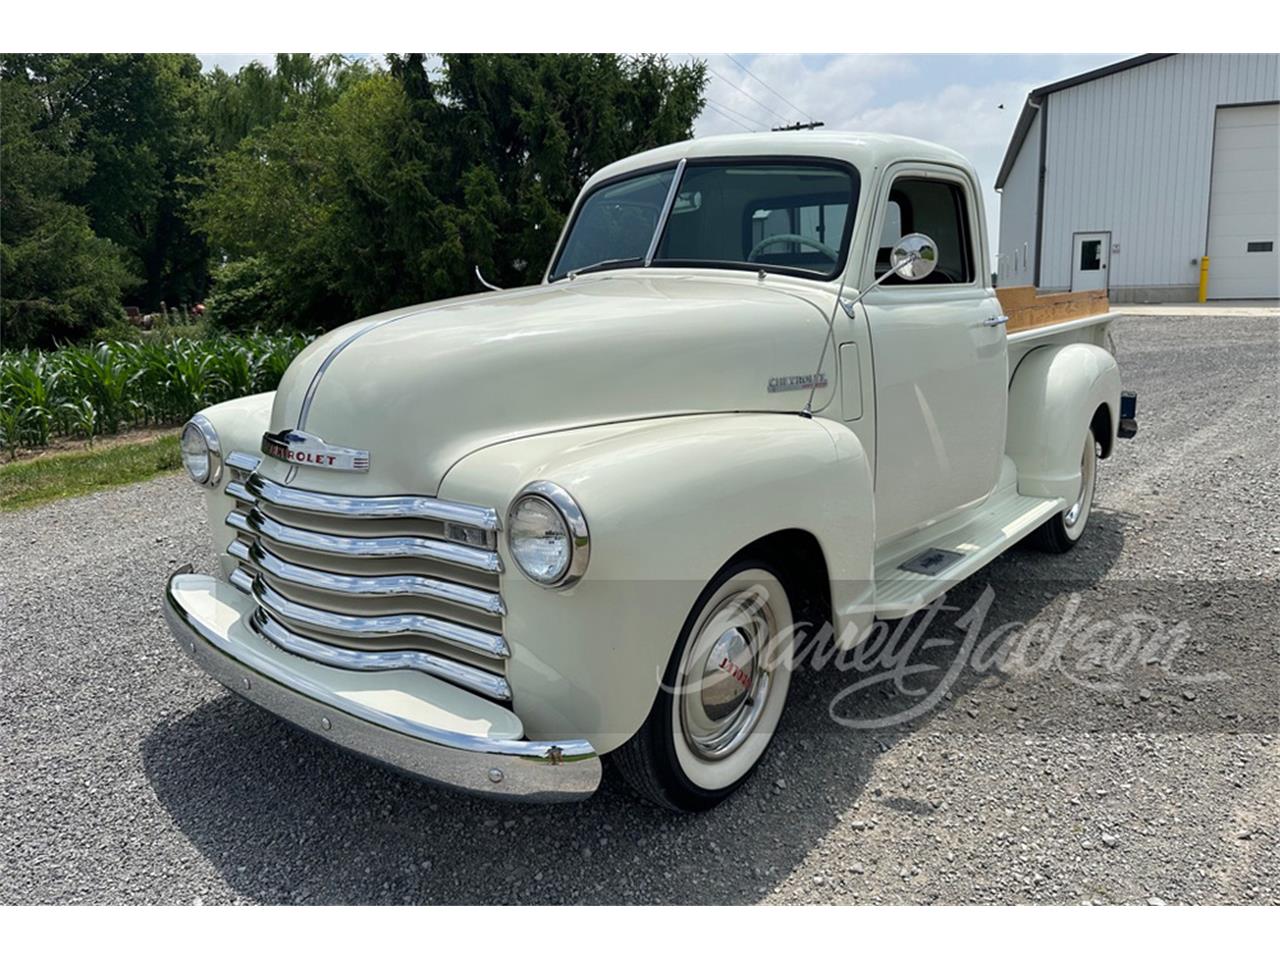 For Sale at Auction: 1948 Chevrolet 3100 in Scottsdale, Arizona for sale in Scottsdale, AZ